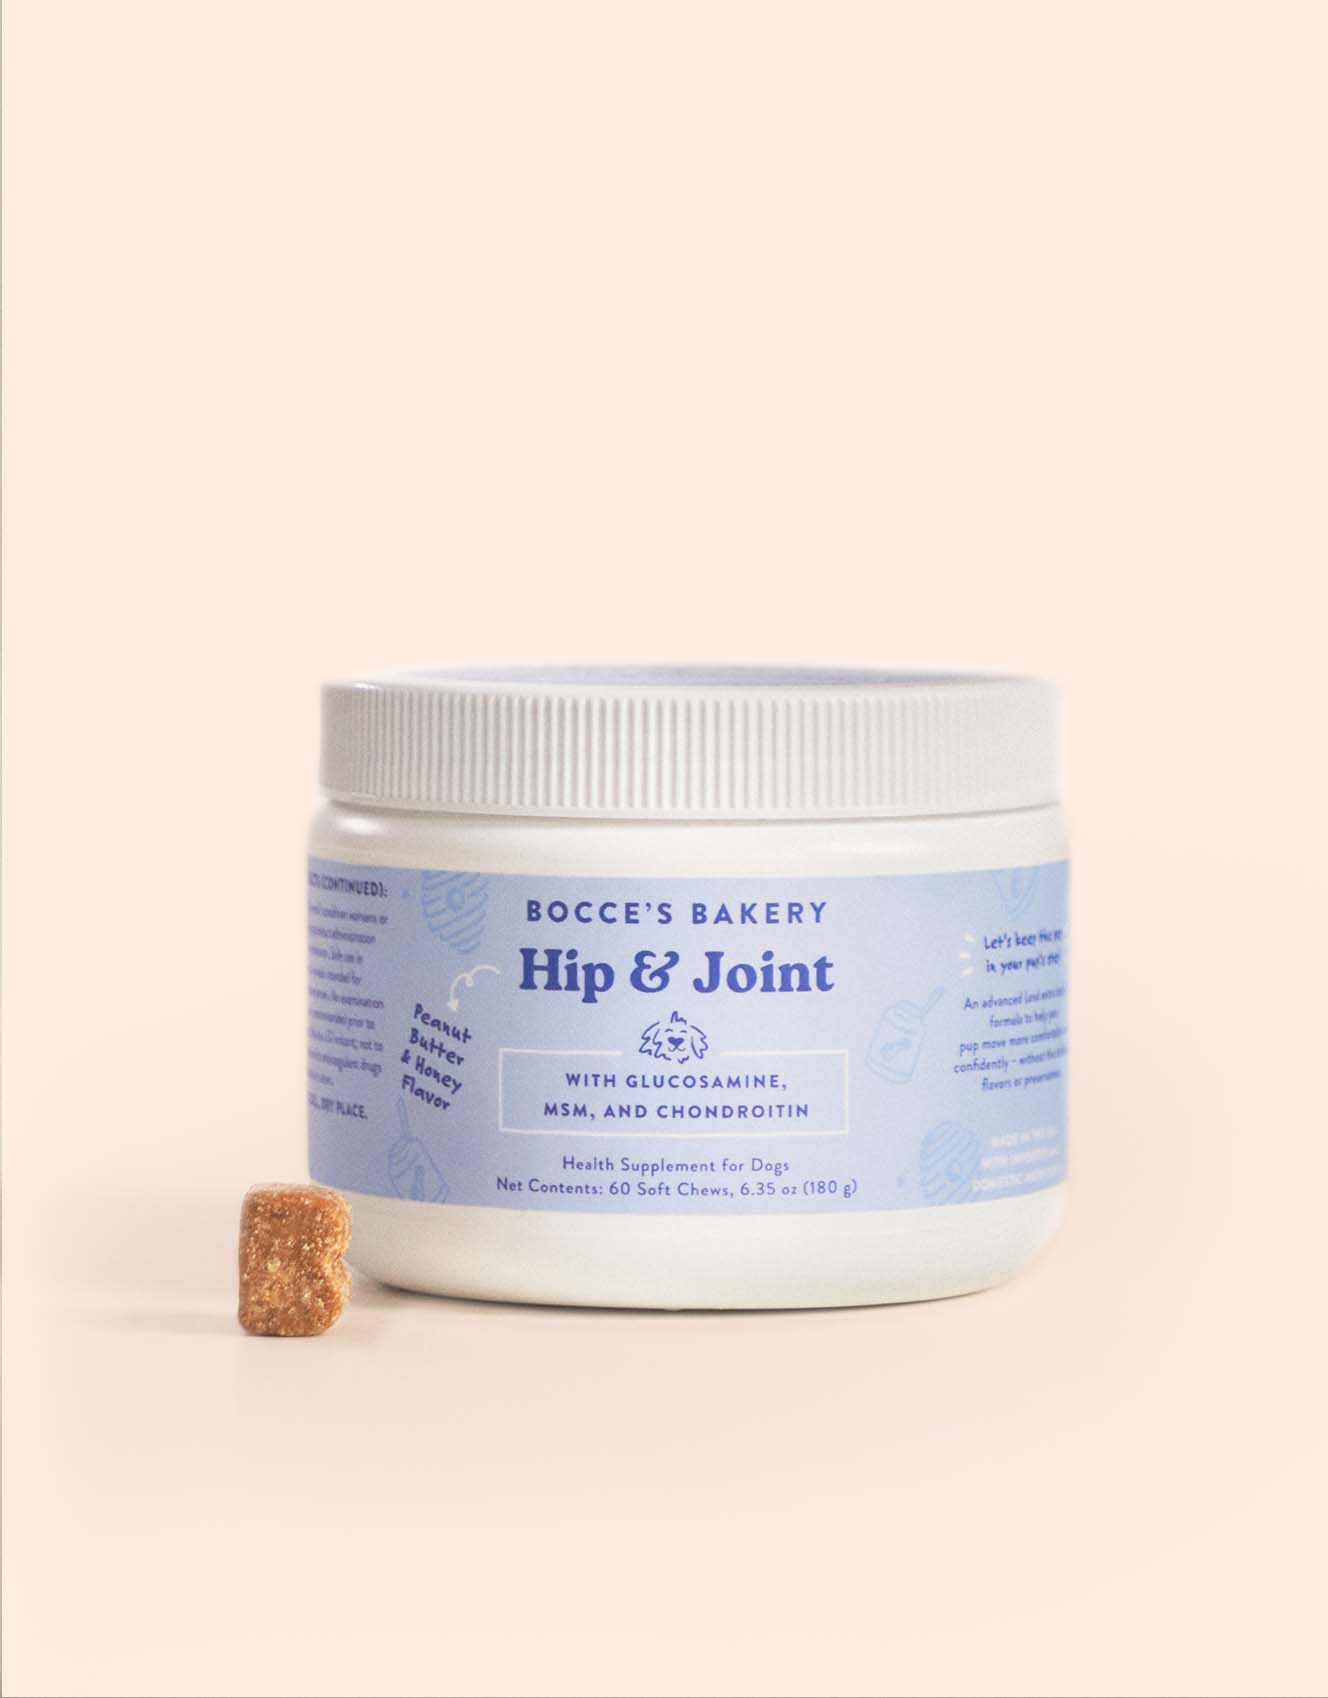 Hip & Joint Health Supplement for Dogs